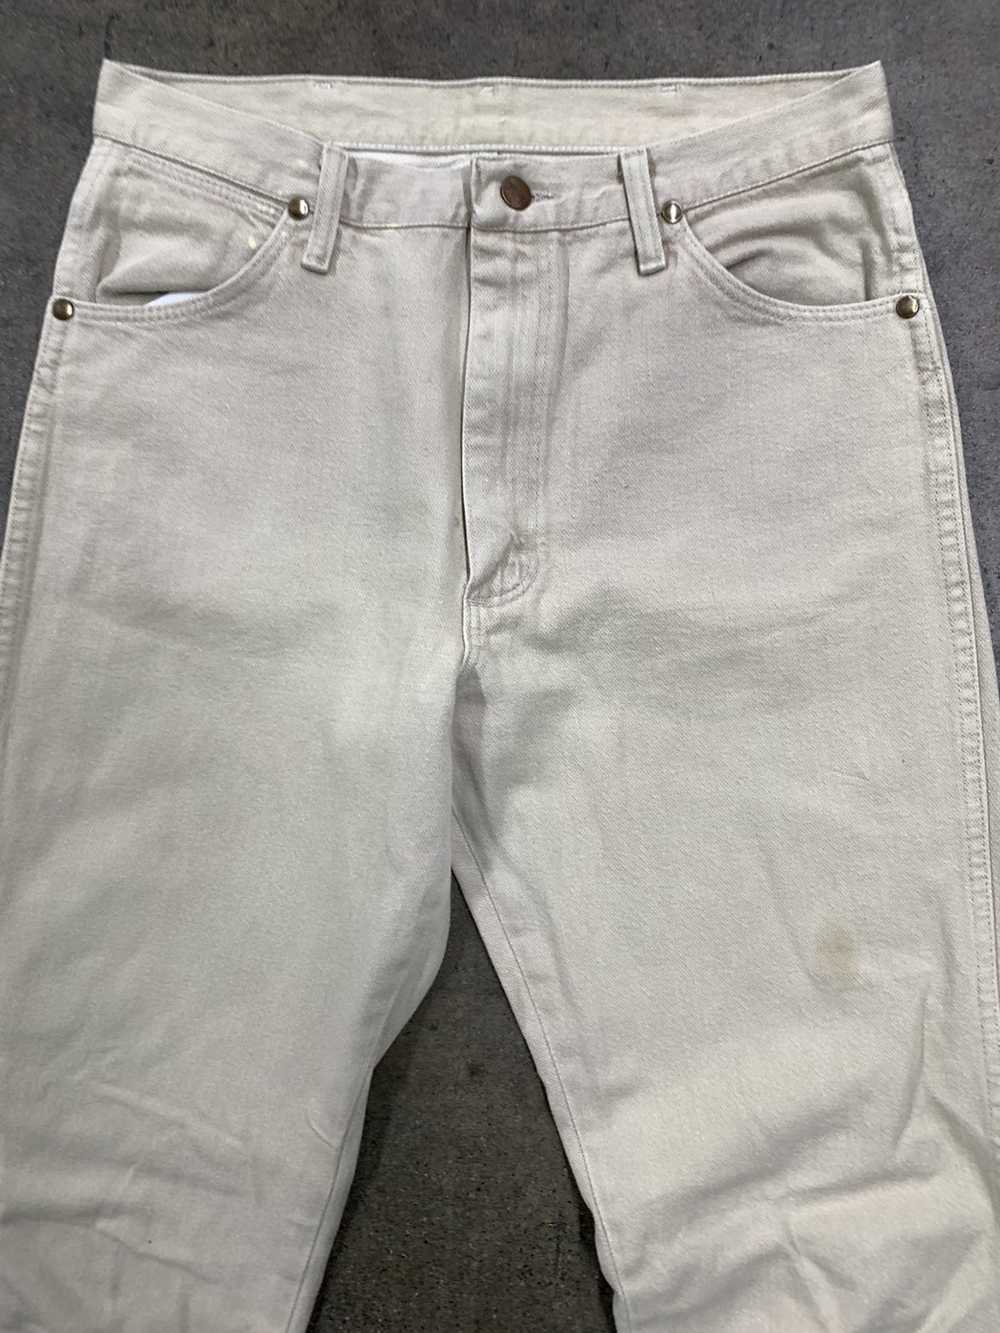 Wrangler Vintage Wrangler Tan Dyed Jeans (Stained) - image 3